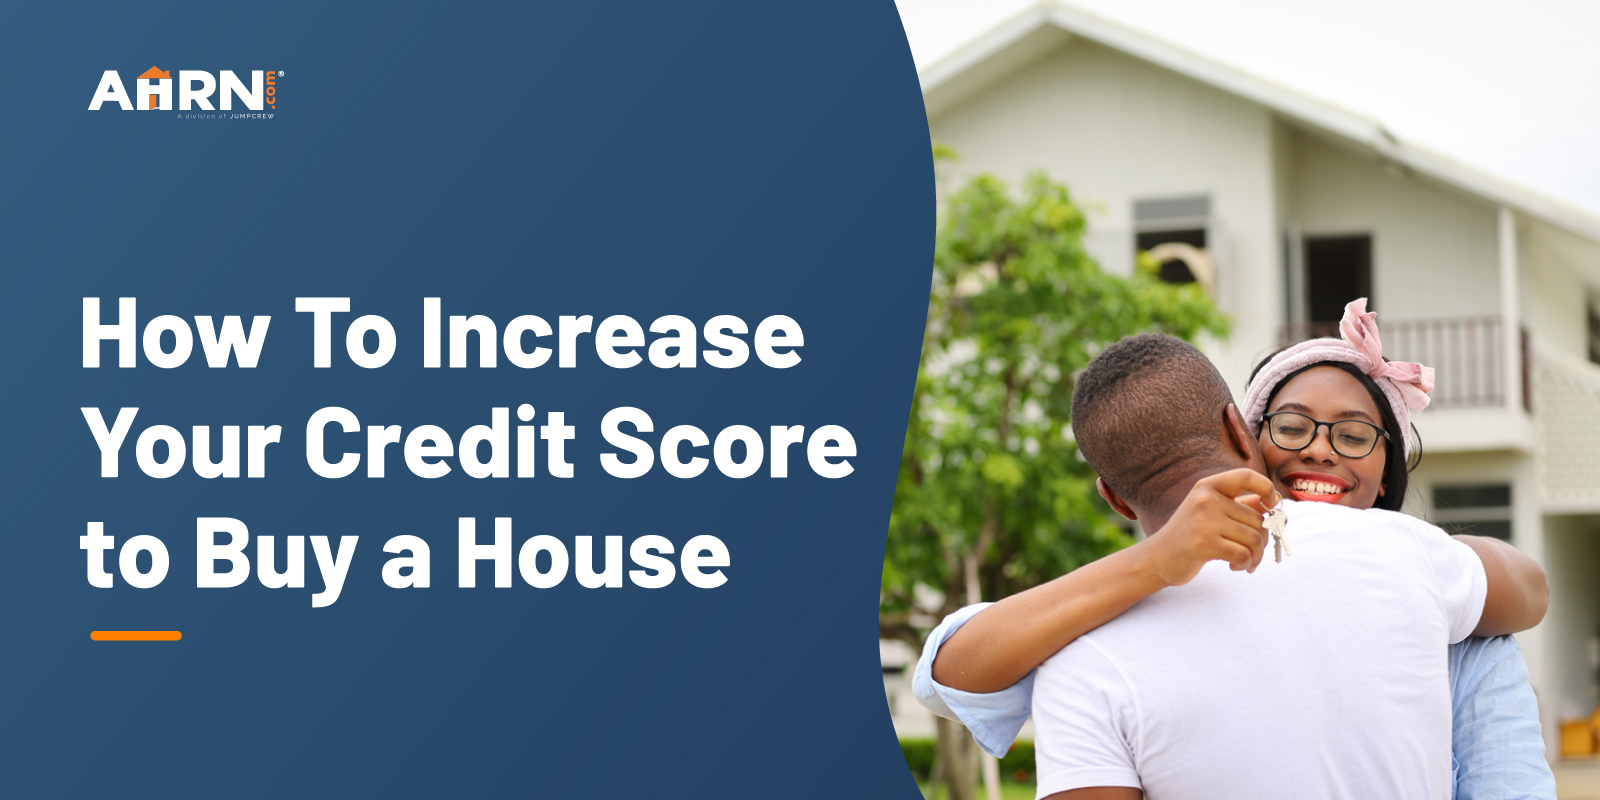 How To Increase Your Credit Score To Buy a House (2022 Edition)